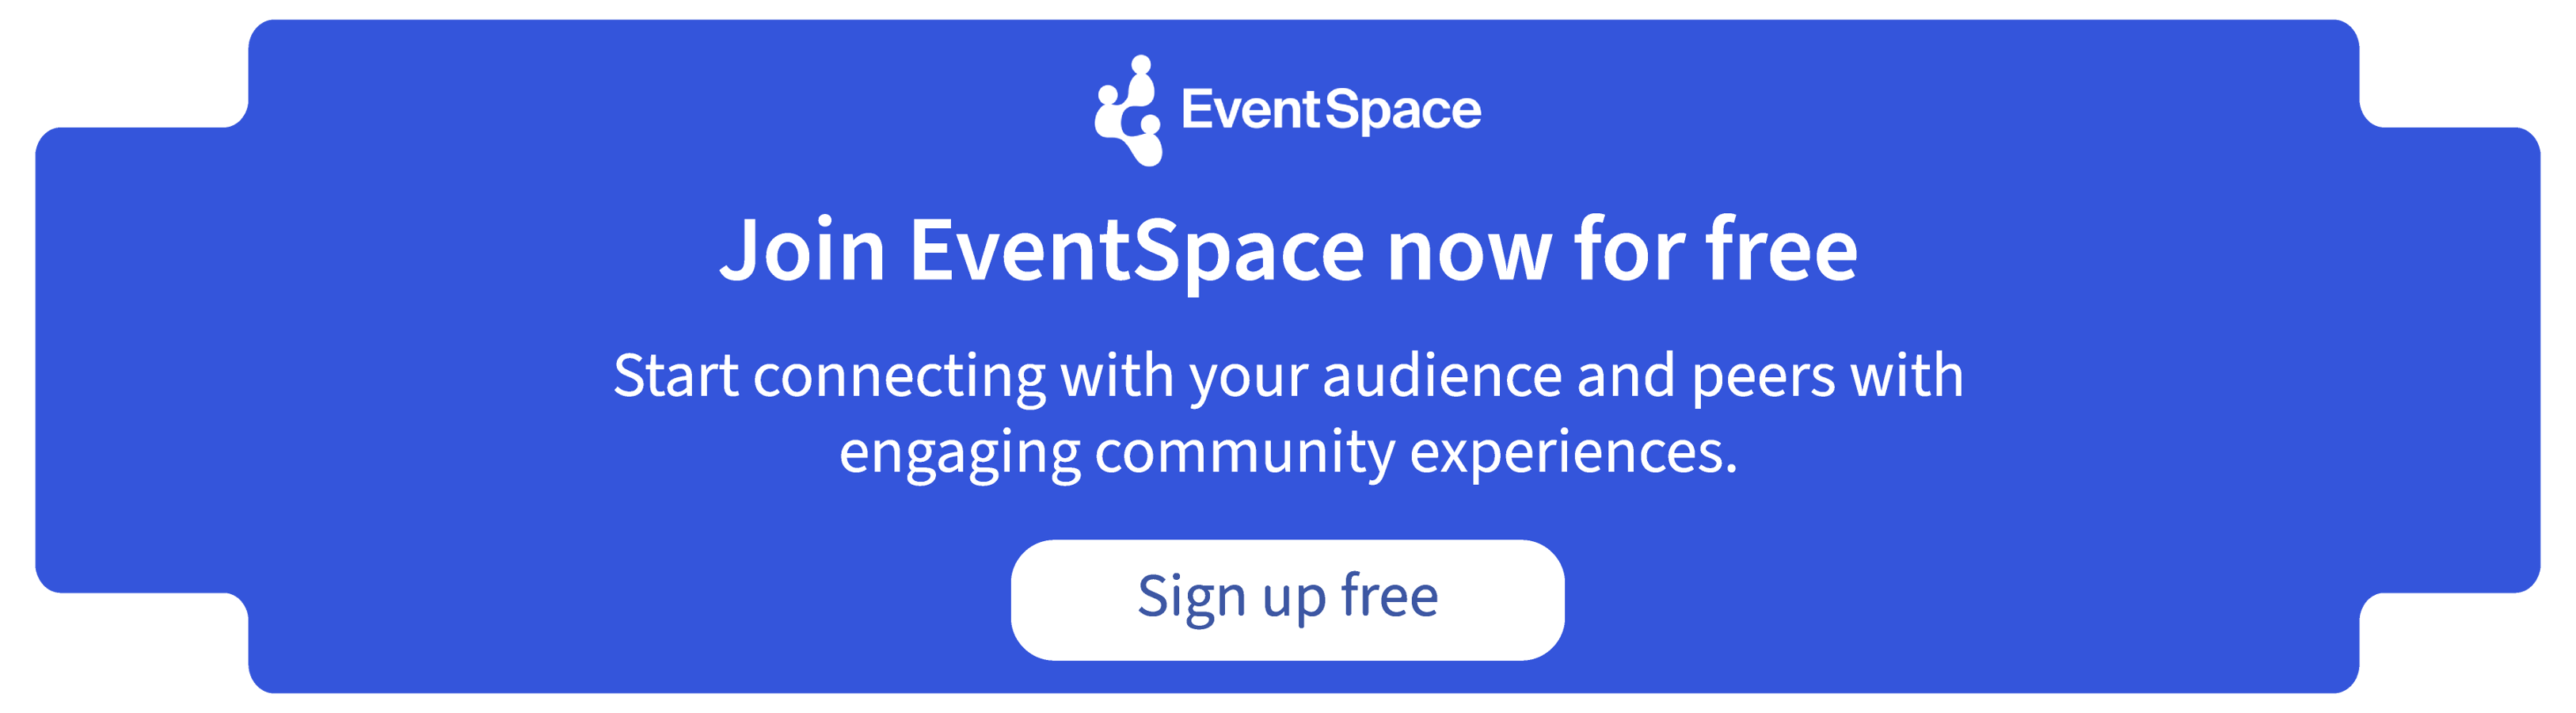 EventSpace Audience Engagement | Join EventSpace